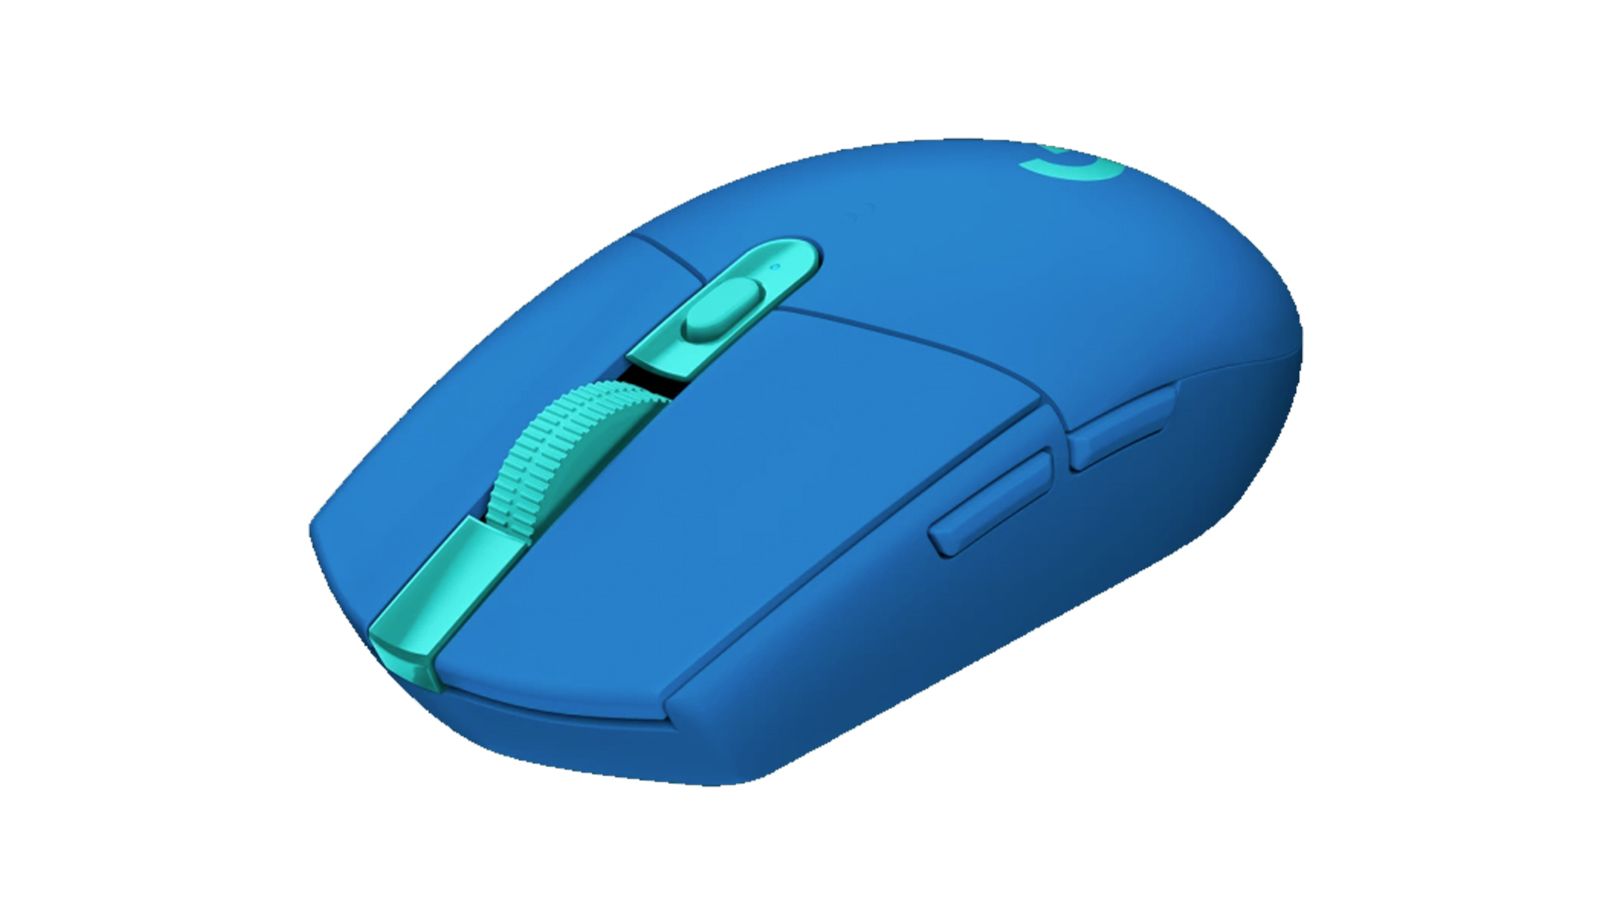 5 Best Logitech Gaming Mouse 